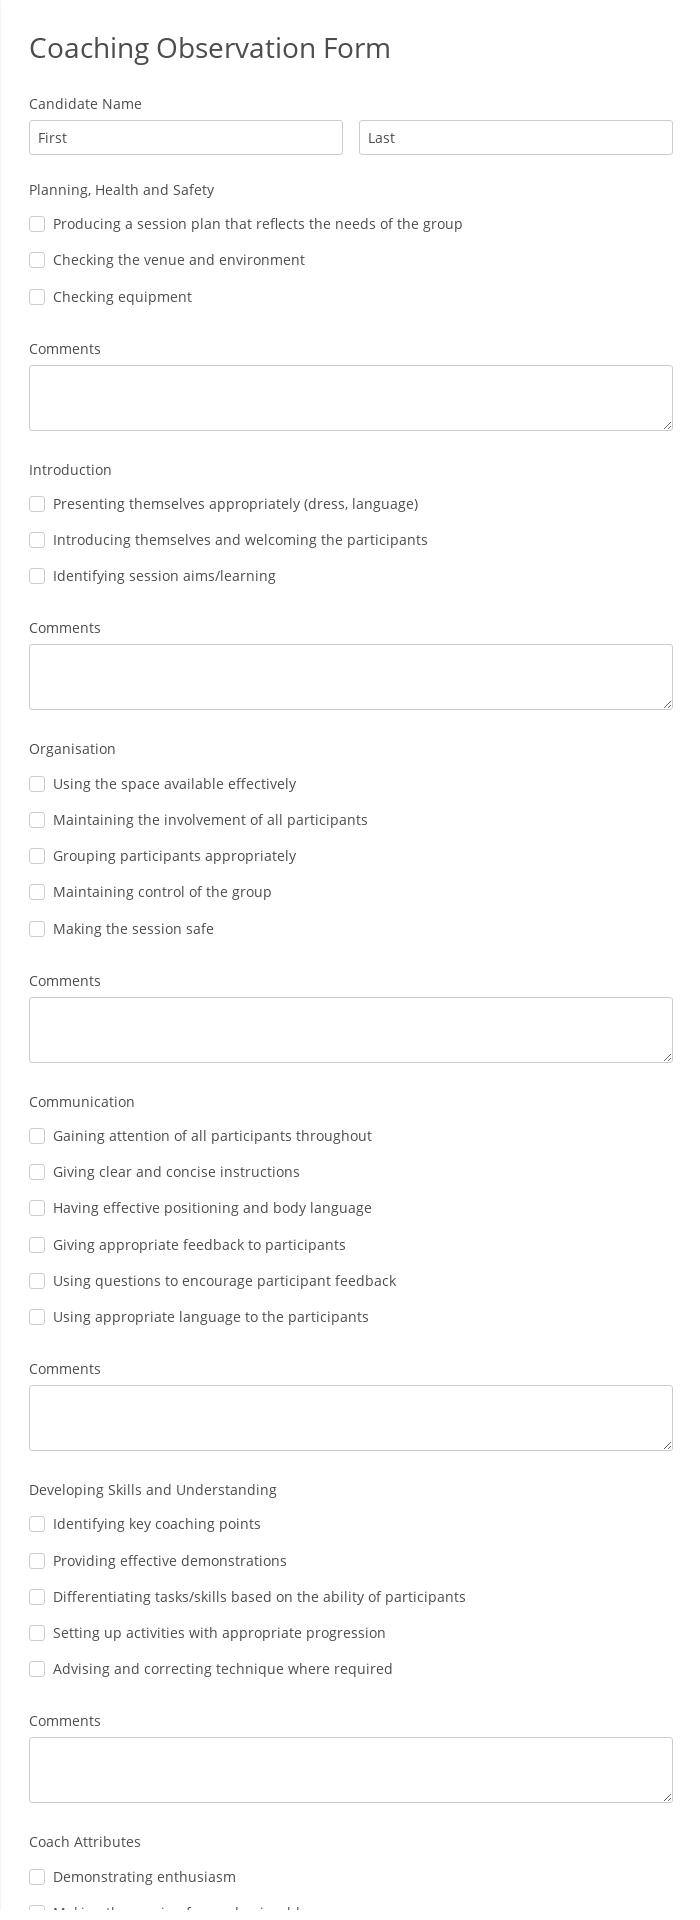 Coaching Observation Form